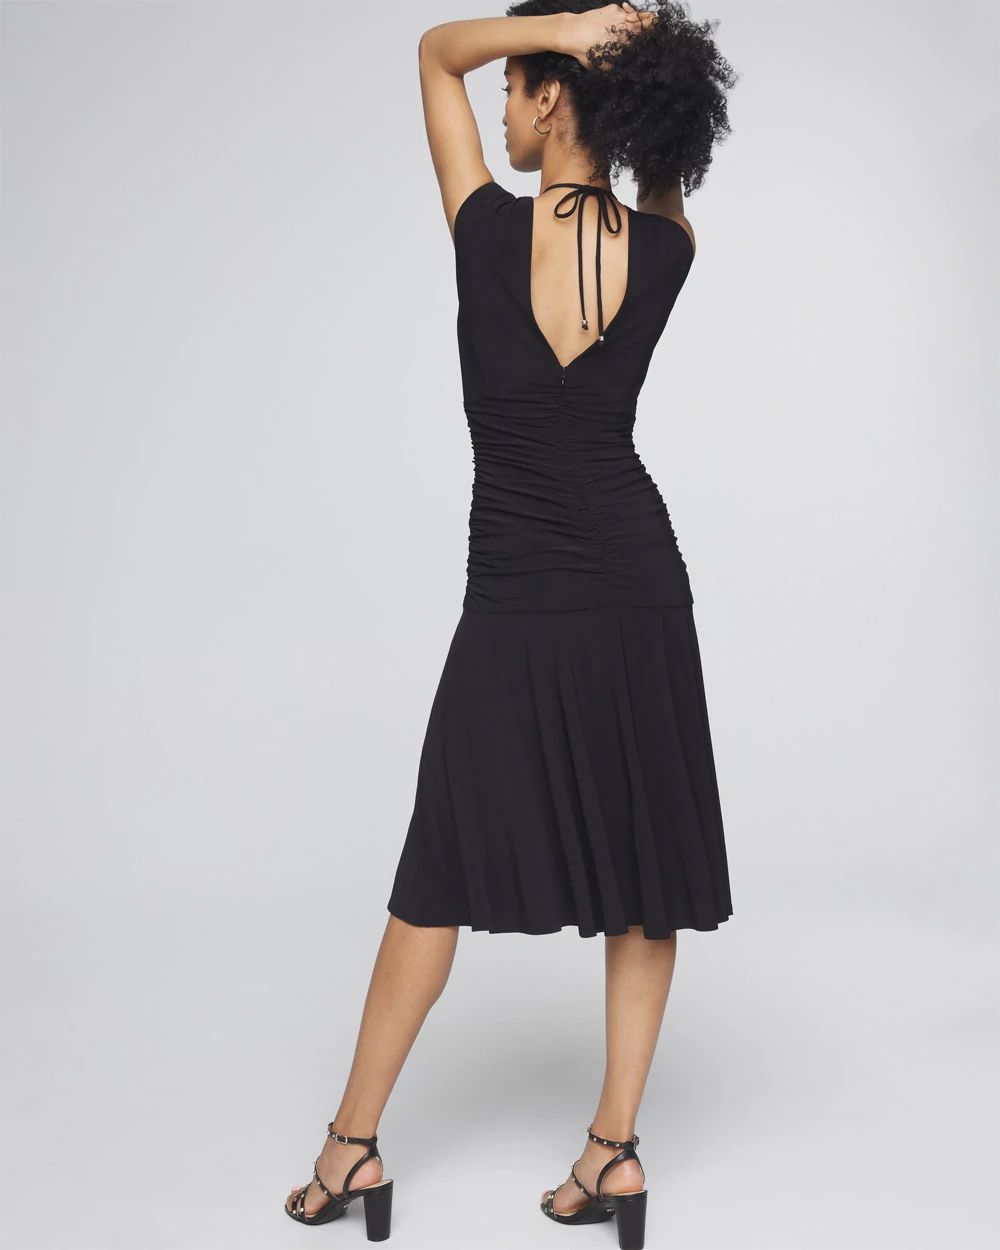 Tie-Shoulder Ruched Matte Jersey Dress click to view larger image.